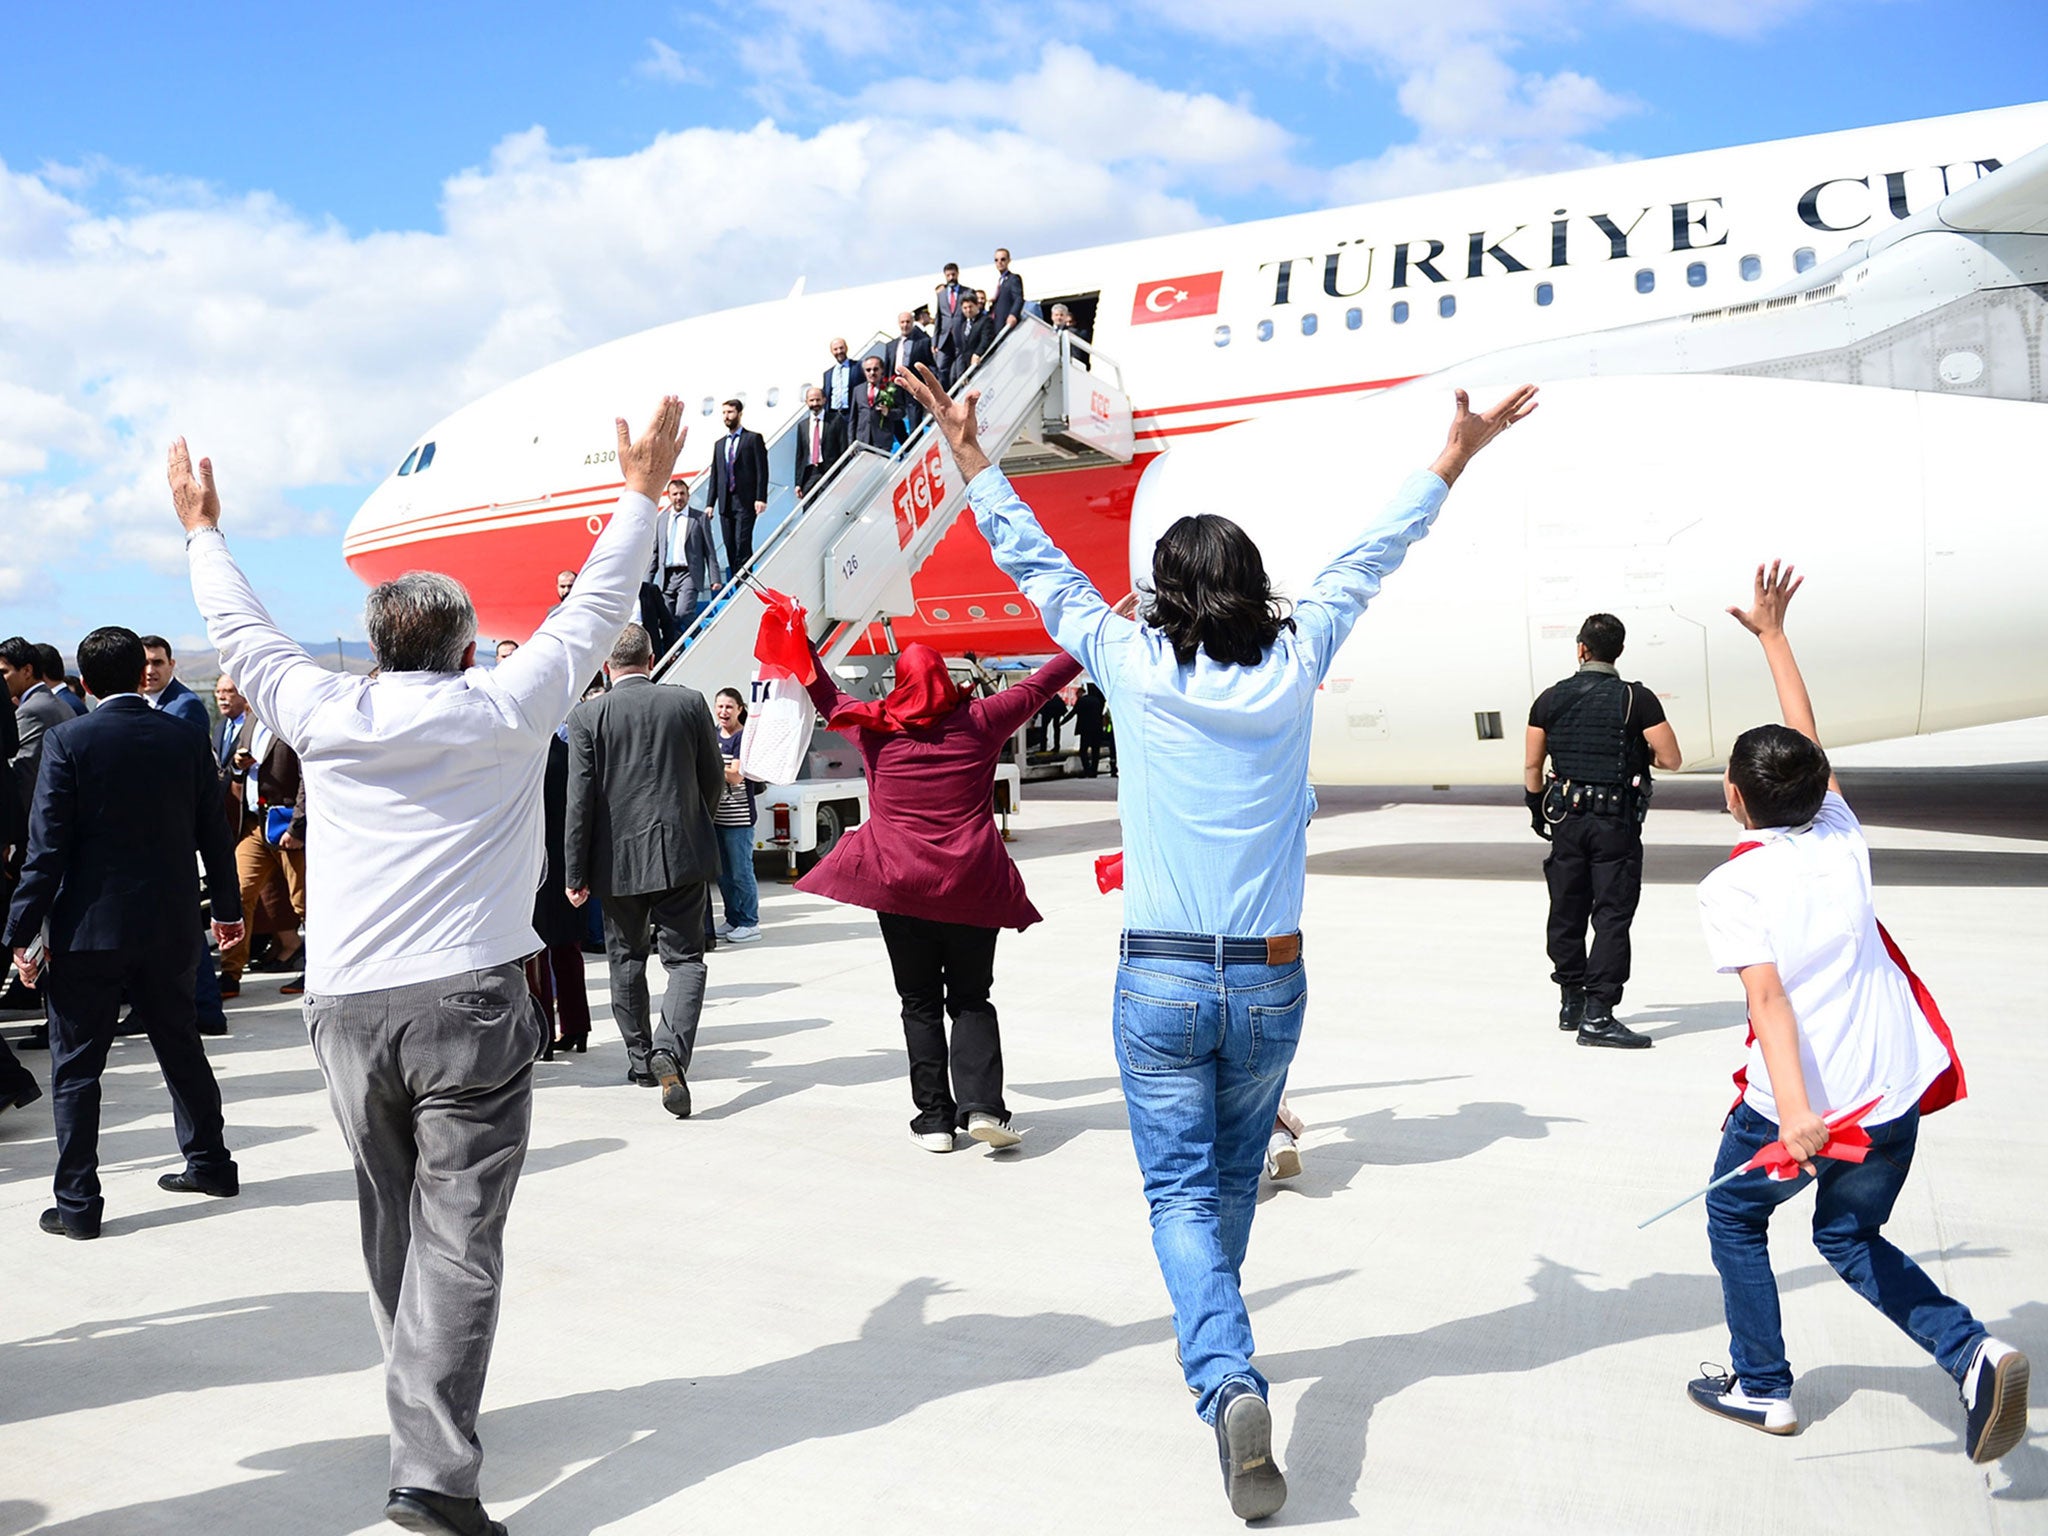 Relatives of the freed hostages greeting their family members in Ankara; questions have been raised about why the brutal organisation chose to release them, unlike other captives